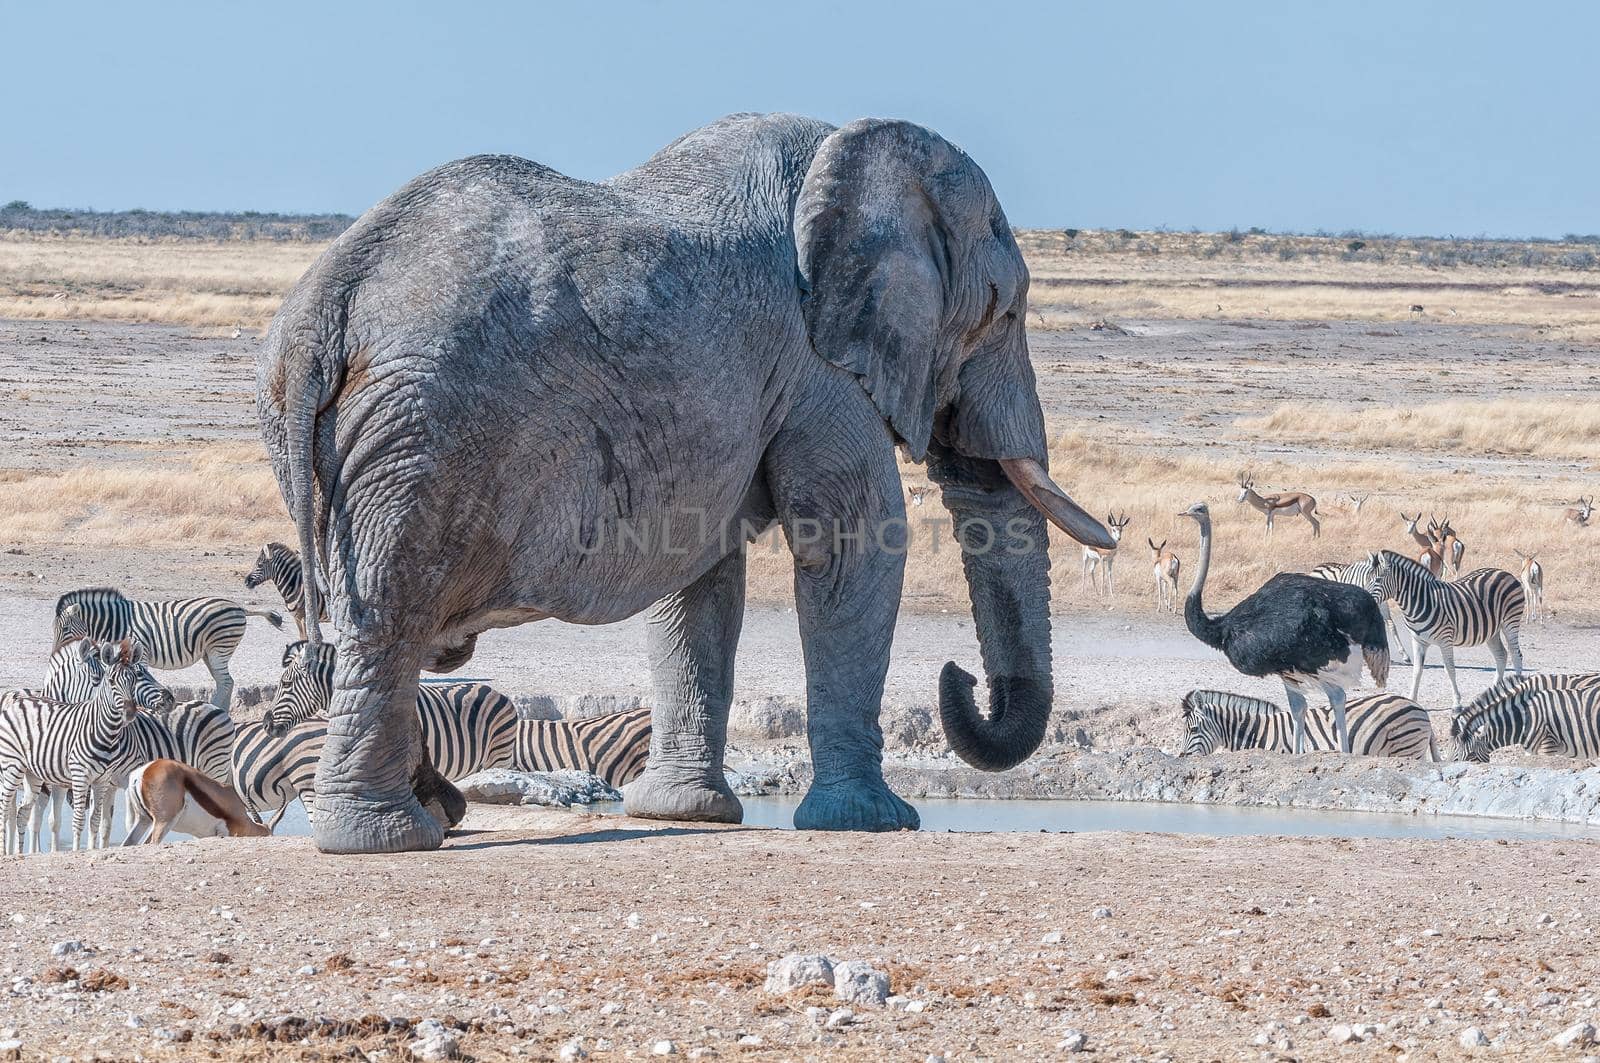 An african elephant drinking water at the Nebrownii waterhole in northern Namibia. Burchells zebras, springbok and a male ostrich are visible